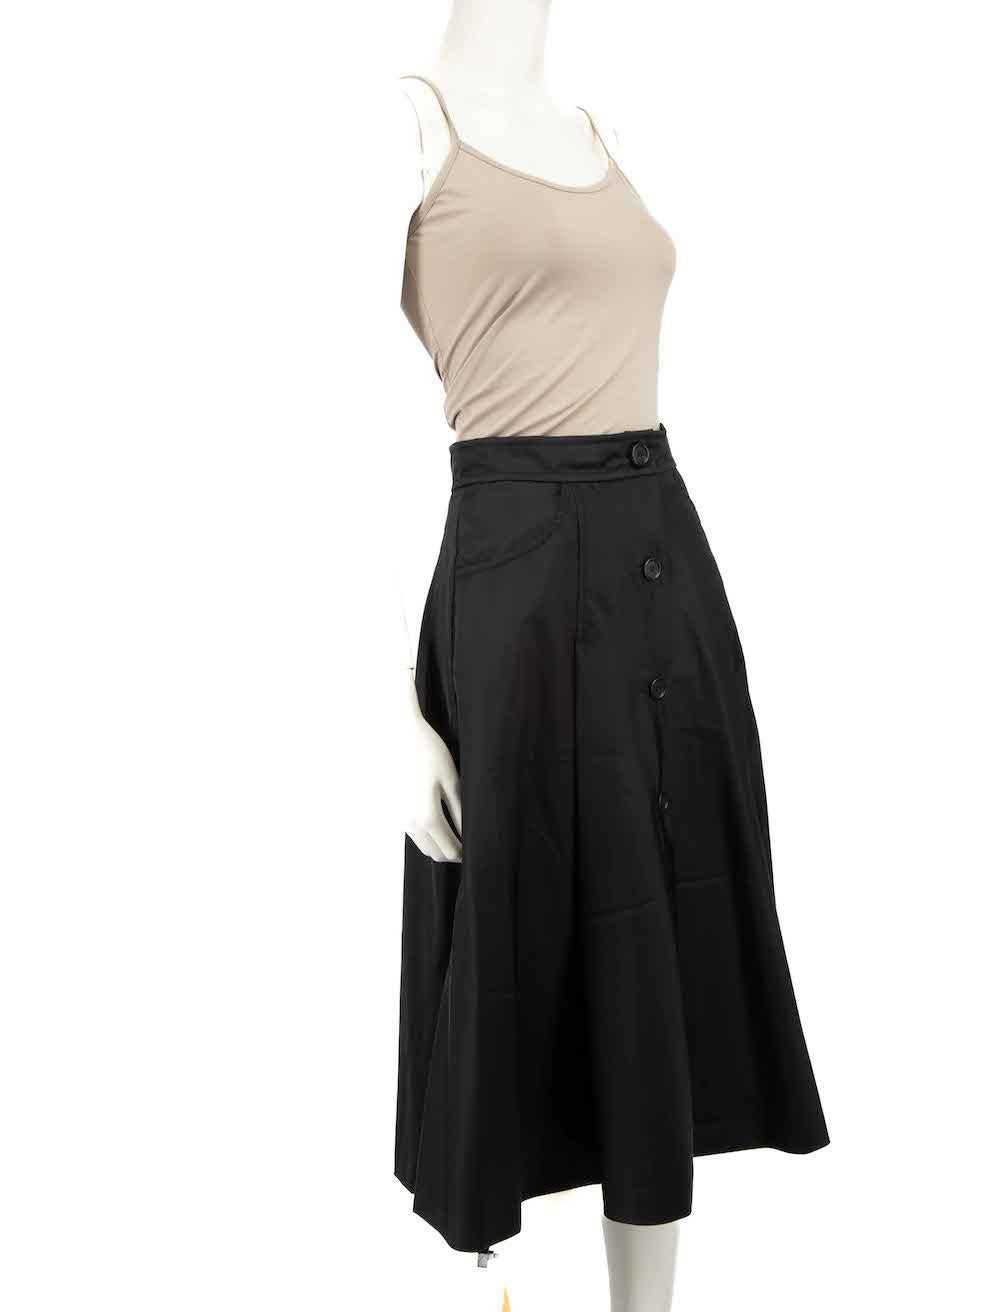 CONDITION is Very good. Hardly any visible wear to skirt is evident on this used Prada designer resale item.
 
 
 
 Details
 
 
 Black
 
 Synthetic
 
 Skirt
 
 A-Line
 
 Midi
 
 Front buttoned fastening
 
 2x Side pockets
 
 
 
 
 
 Made in Romania
